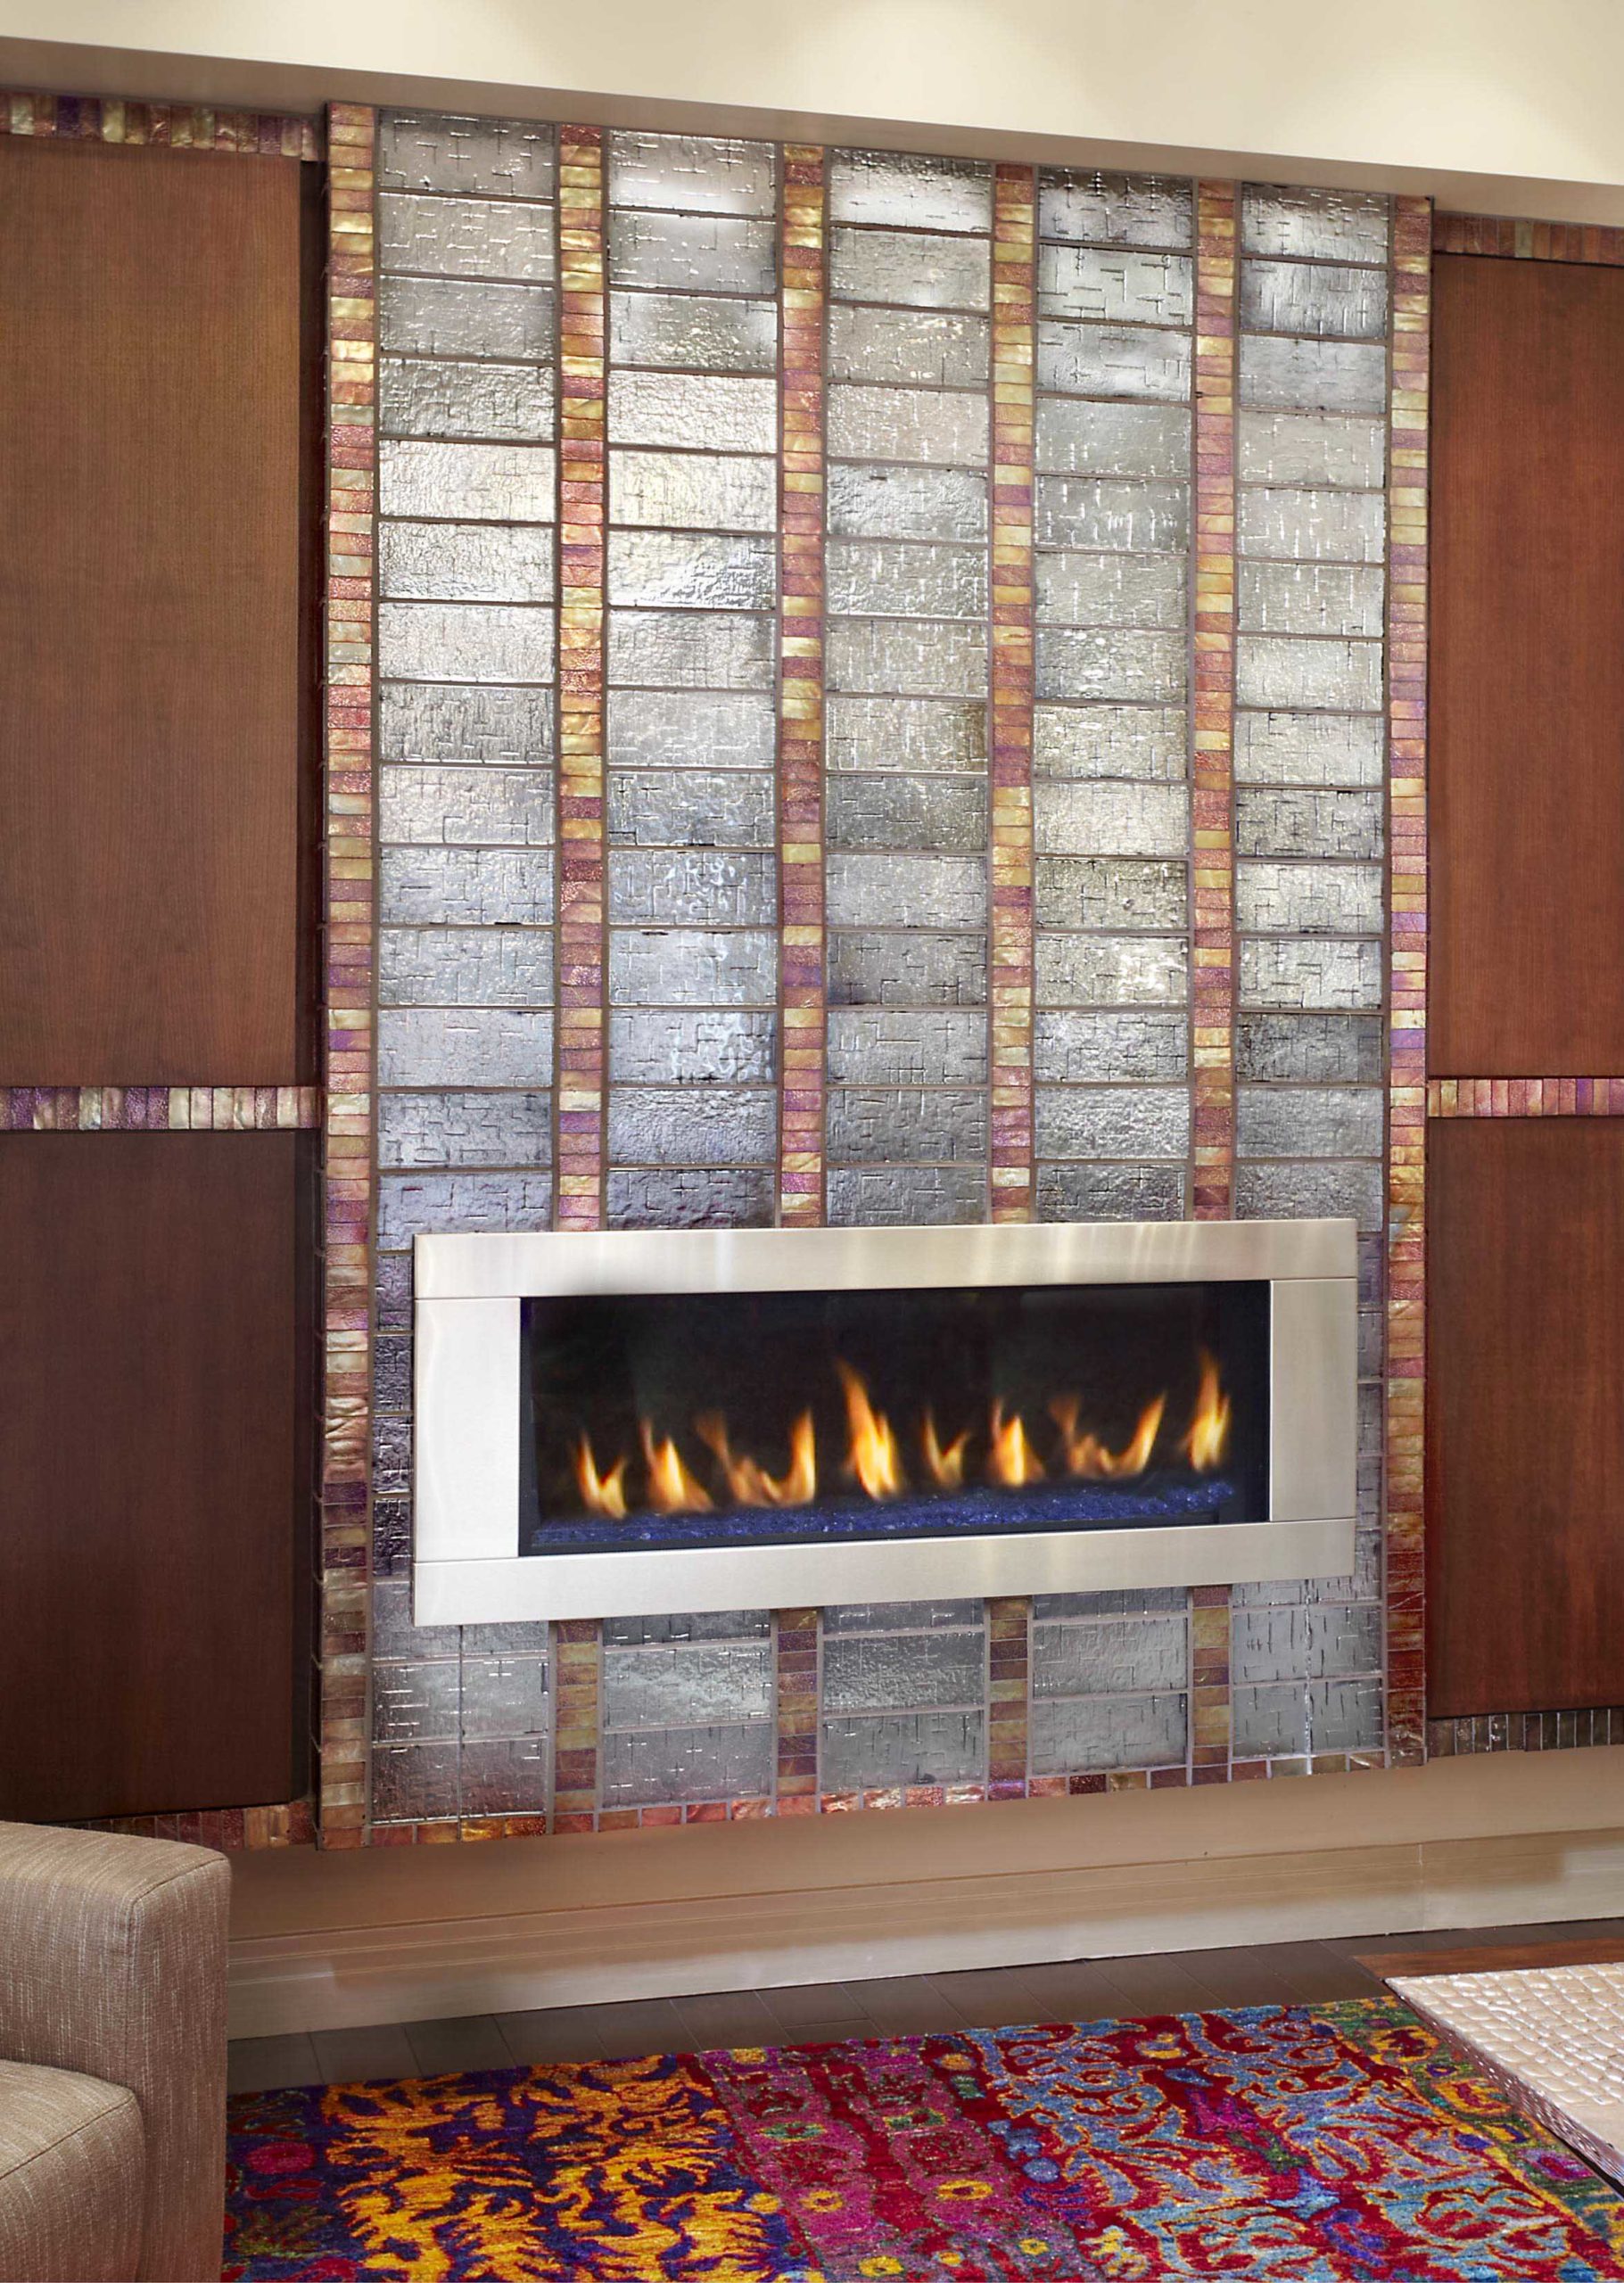 Tiled fireplace with fire lit